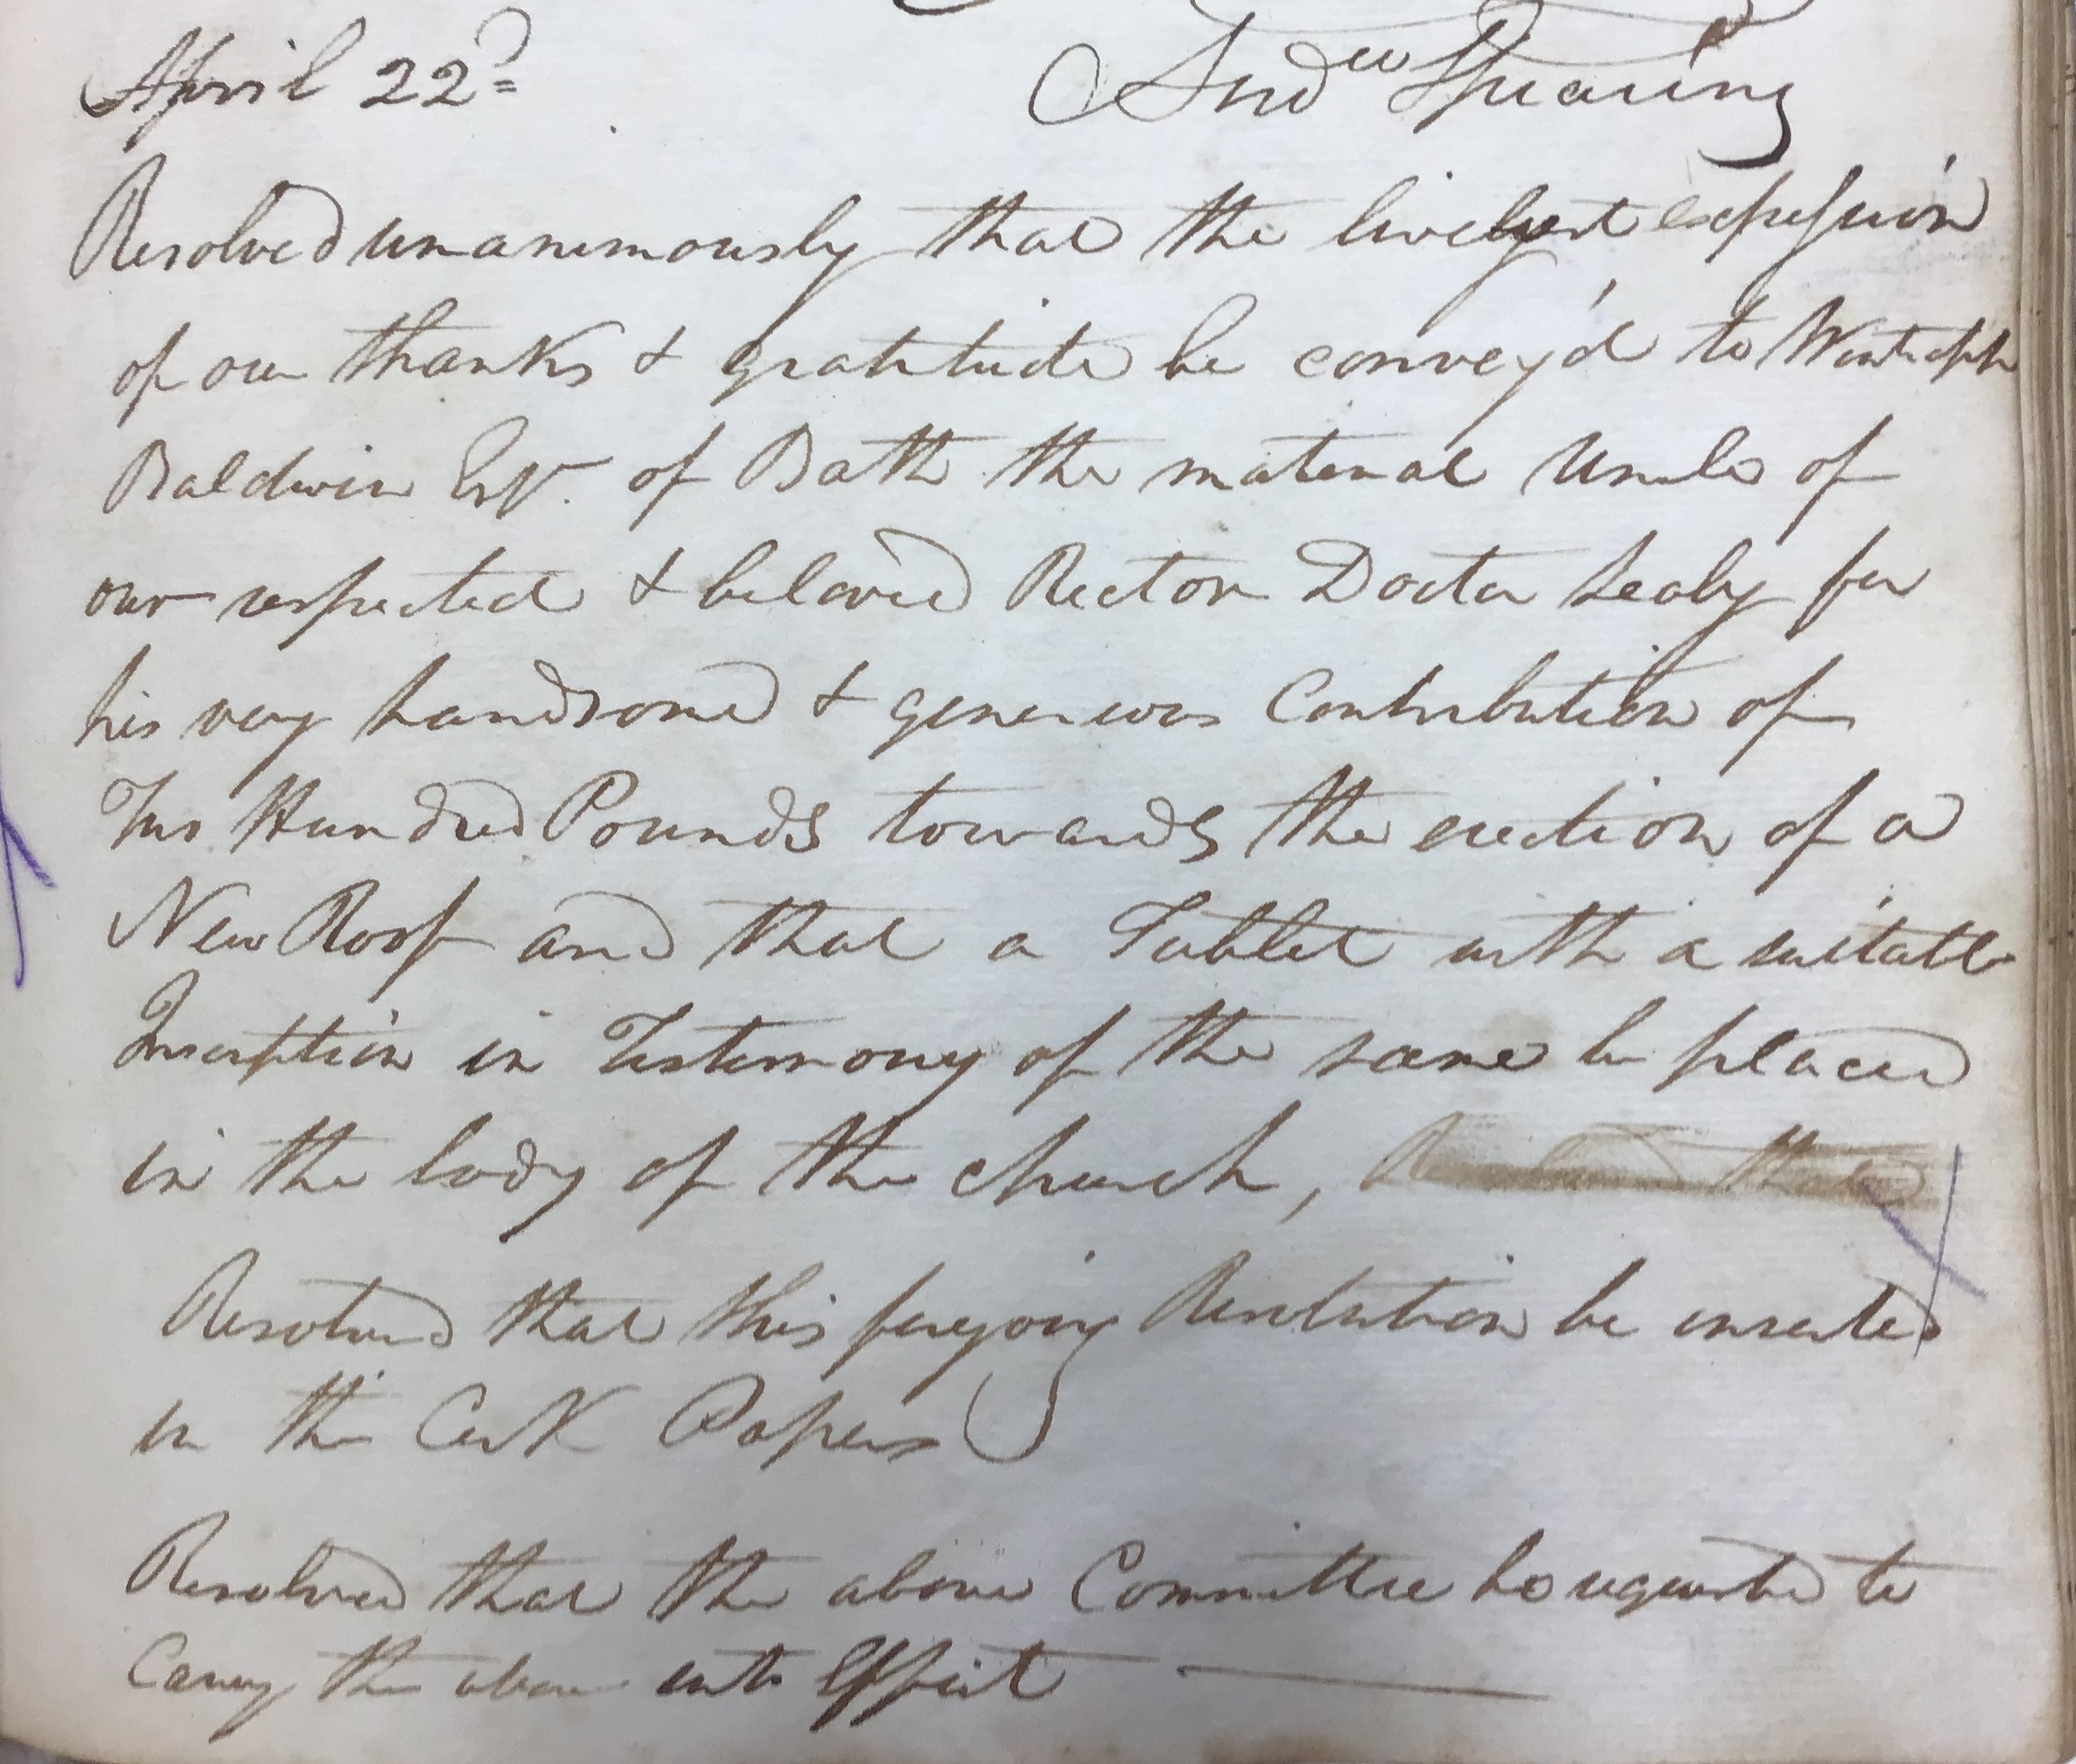 The record of the Vestry meeting from 22 April 1817, expressing the thanks of the parish to Winthrop Baldwin, of Bath, the maternal uncle of the rector. We also see a glimpse of how the parishioners of St Paul's (or at least the Vestry) viewed the current rector, who is described as 'respected and beloved'. RCB Library P349.05.1.